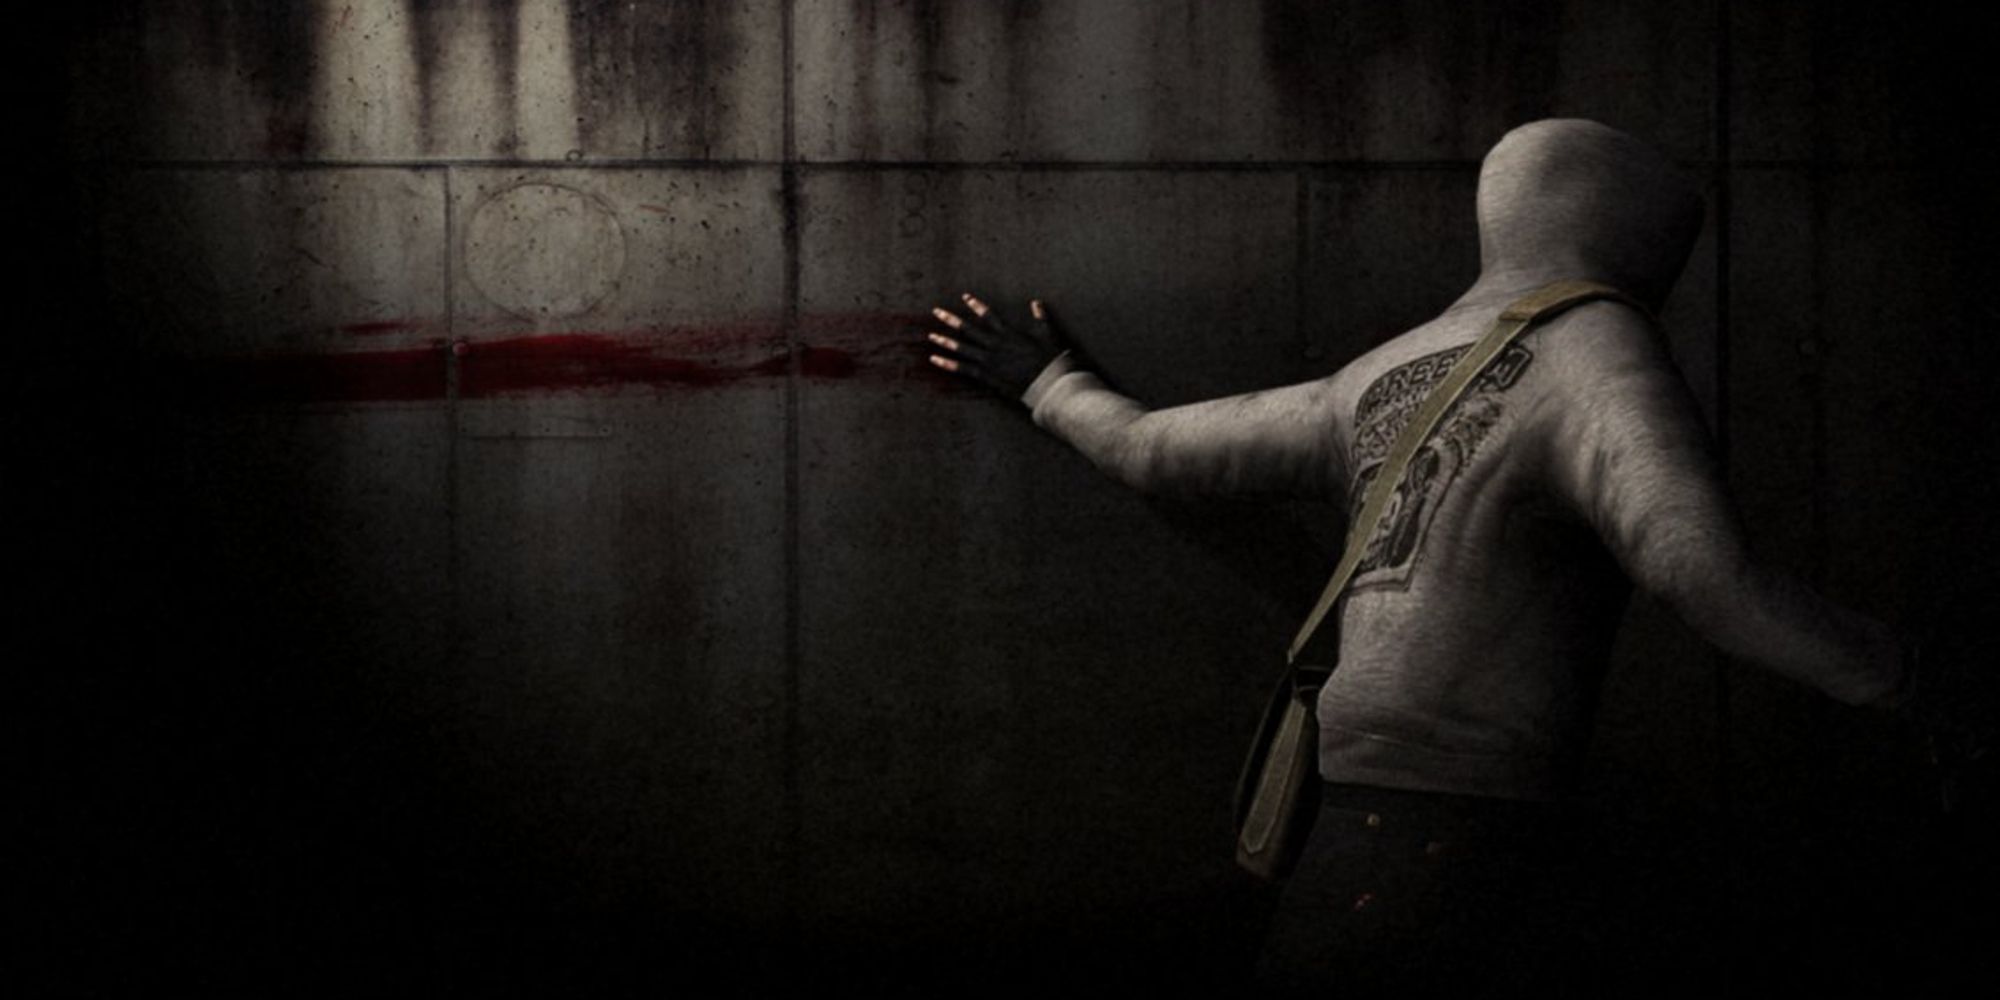 Simon sprawling bloon on the wall in key art for Cry Of Fear (2013)